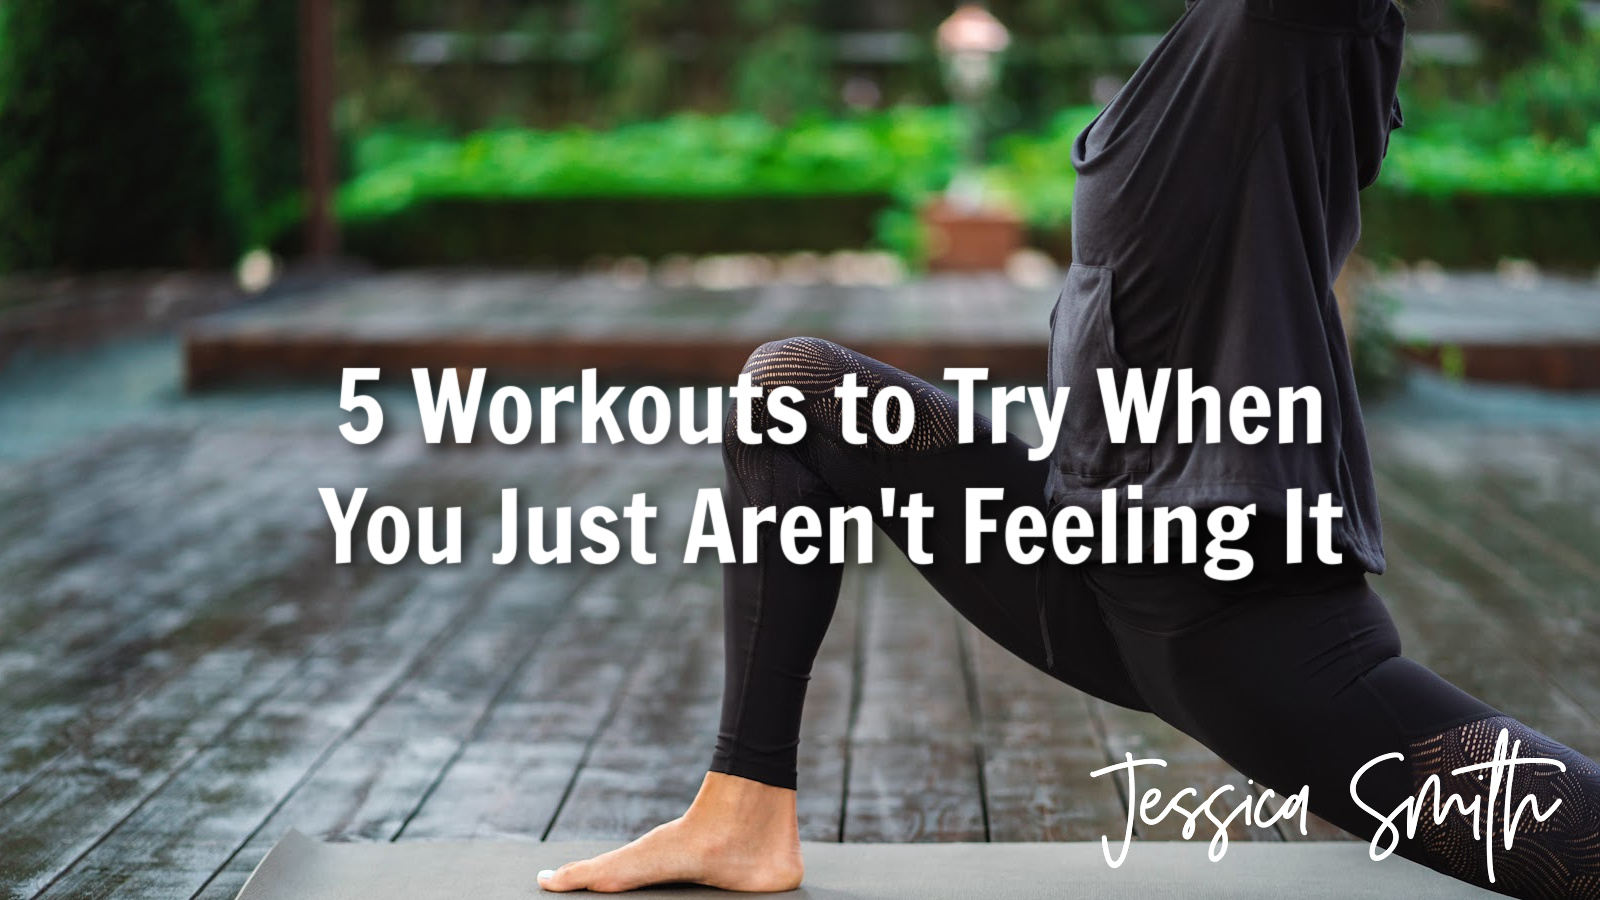 5 (FREE) Workouts To Try When You Just Aren’t Feeling It